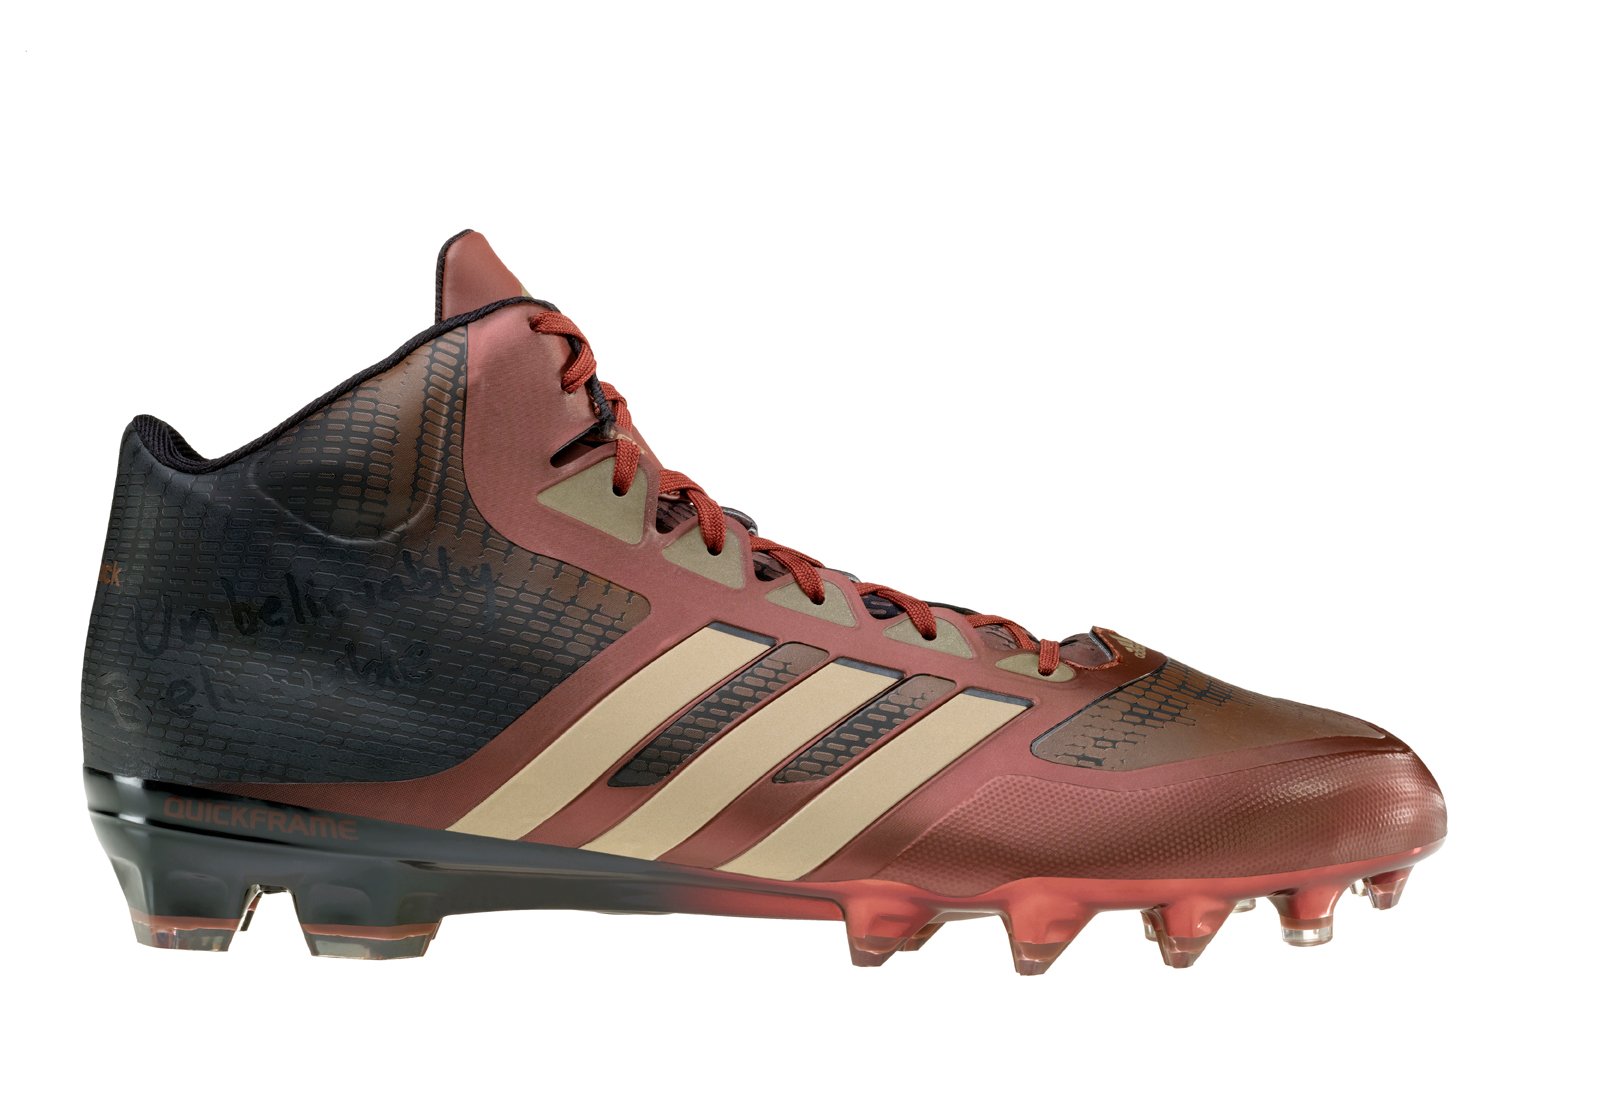 RGIII Previews New adidas Cleats Prior to Monday Night Football